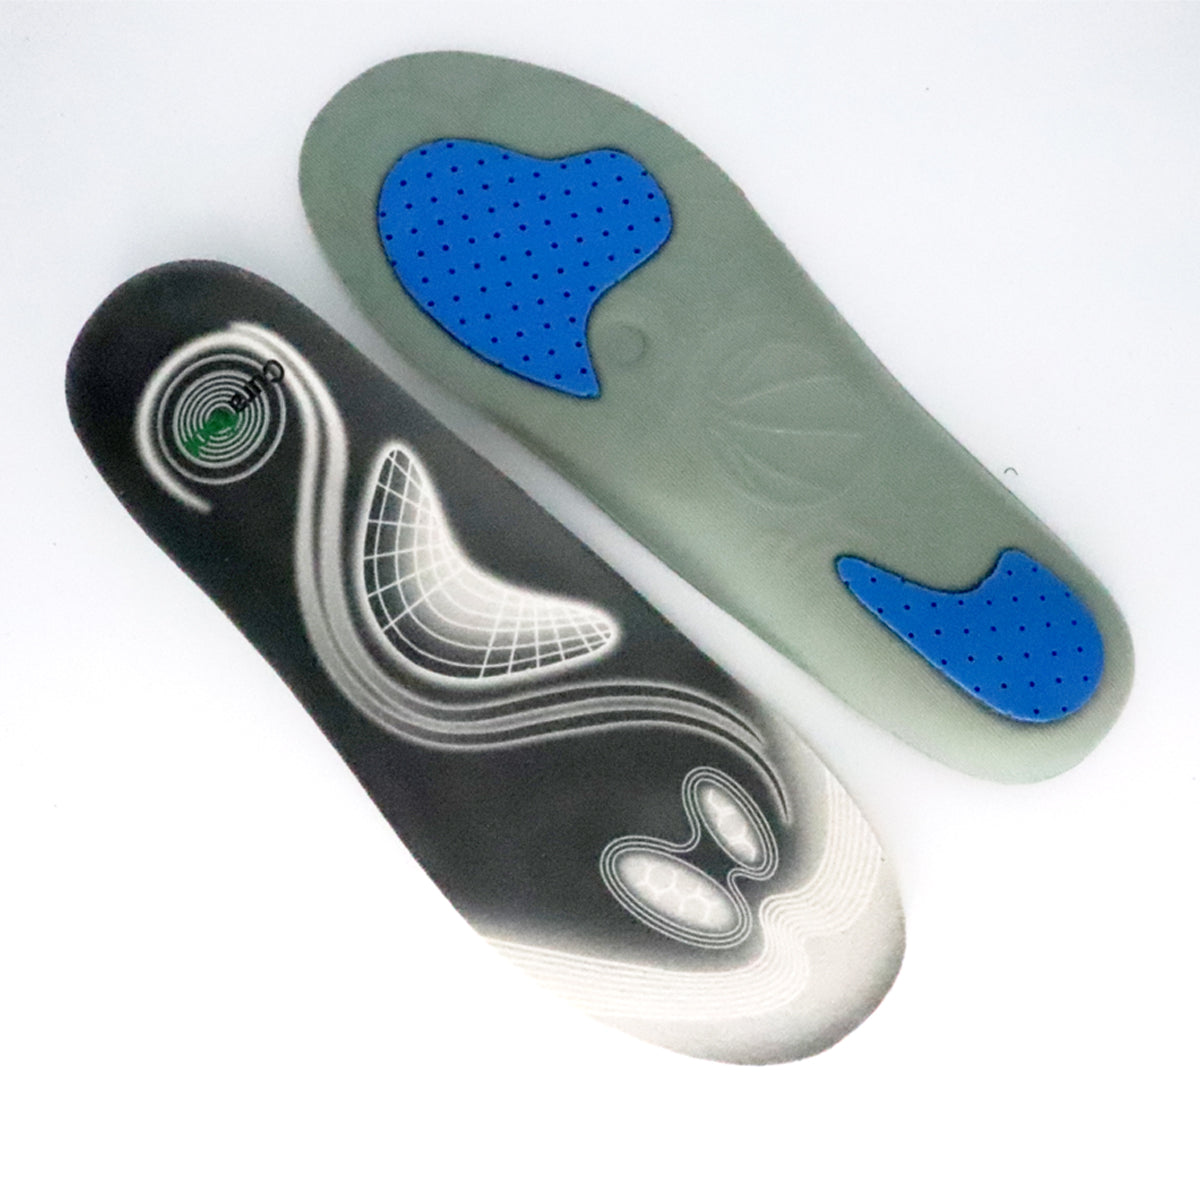 Curafoot Pain Relief Insoles 